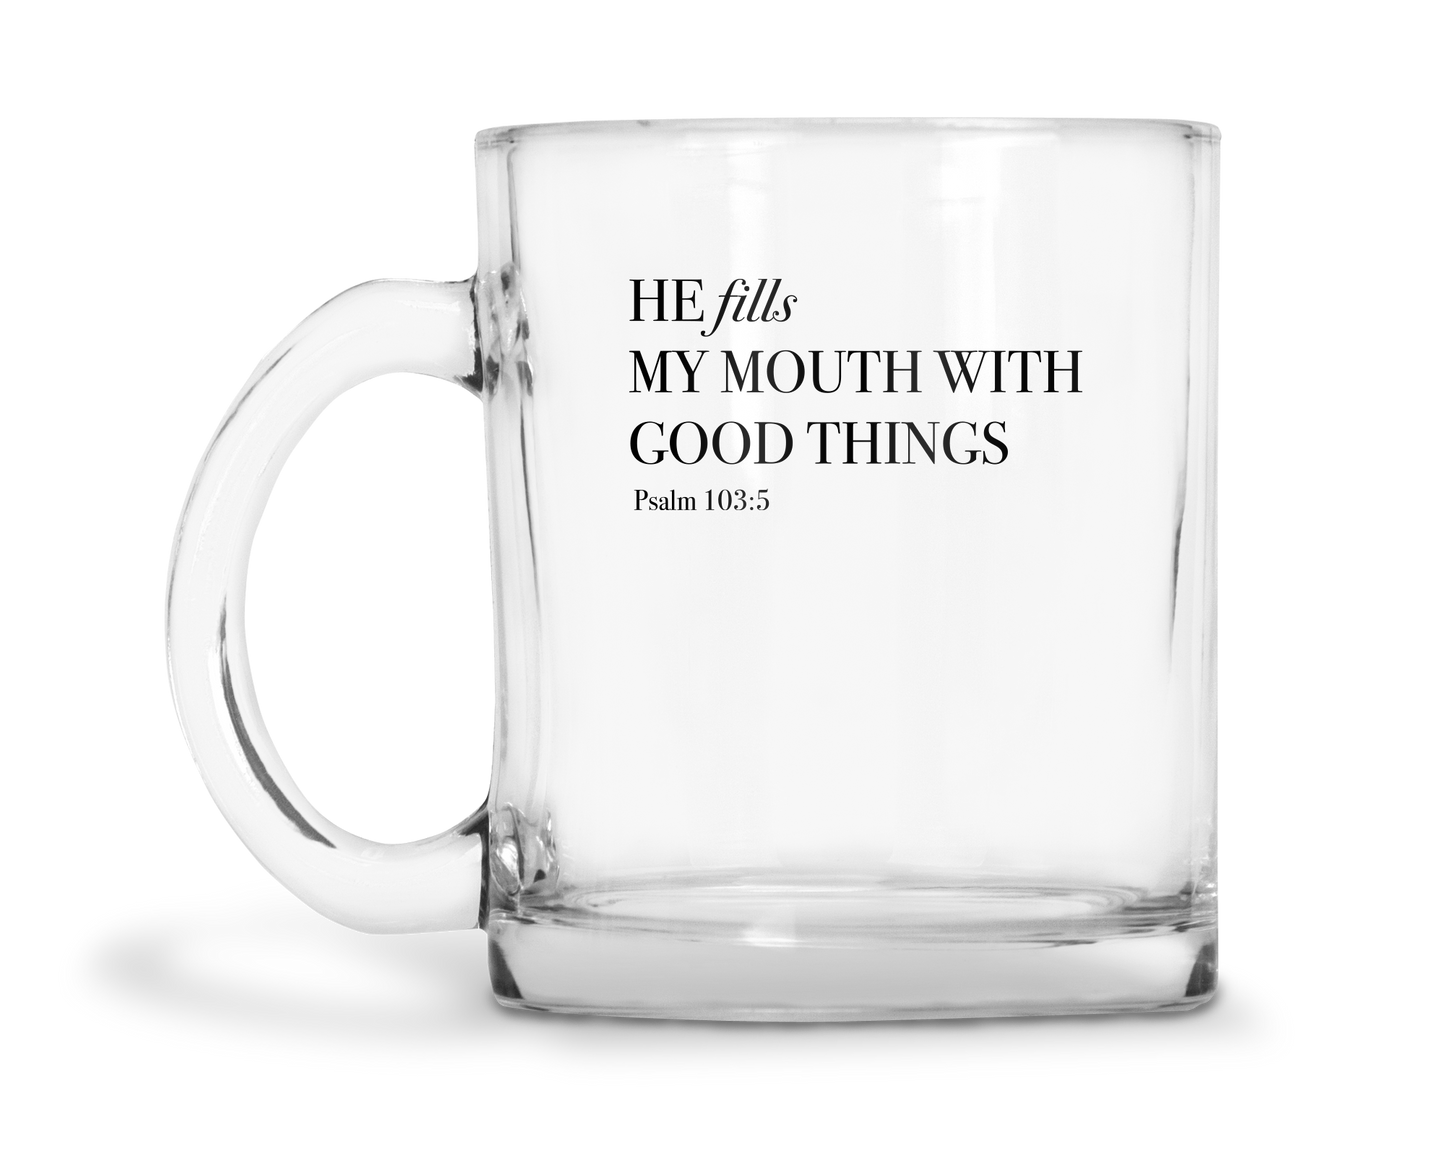 He Fills My Mouth With Good Things - Psalm 103:5 - 10oz Glass Mug